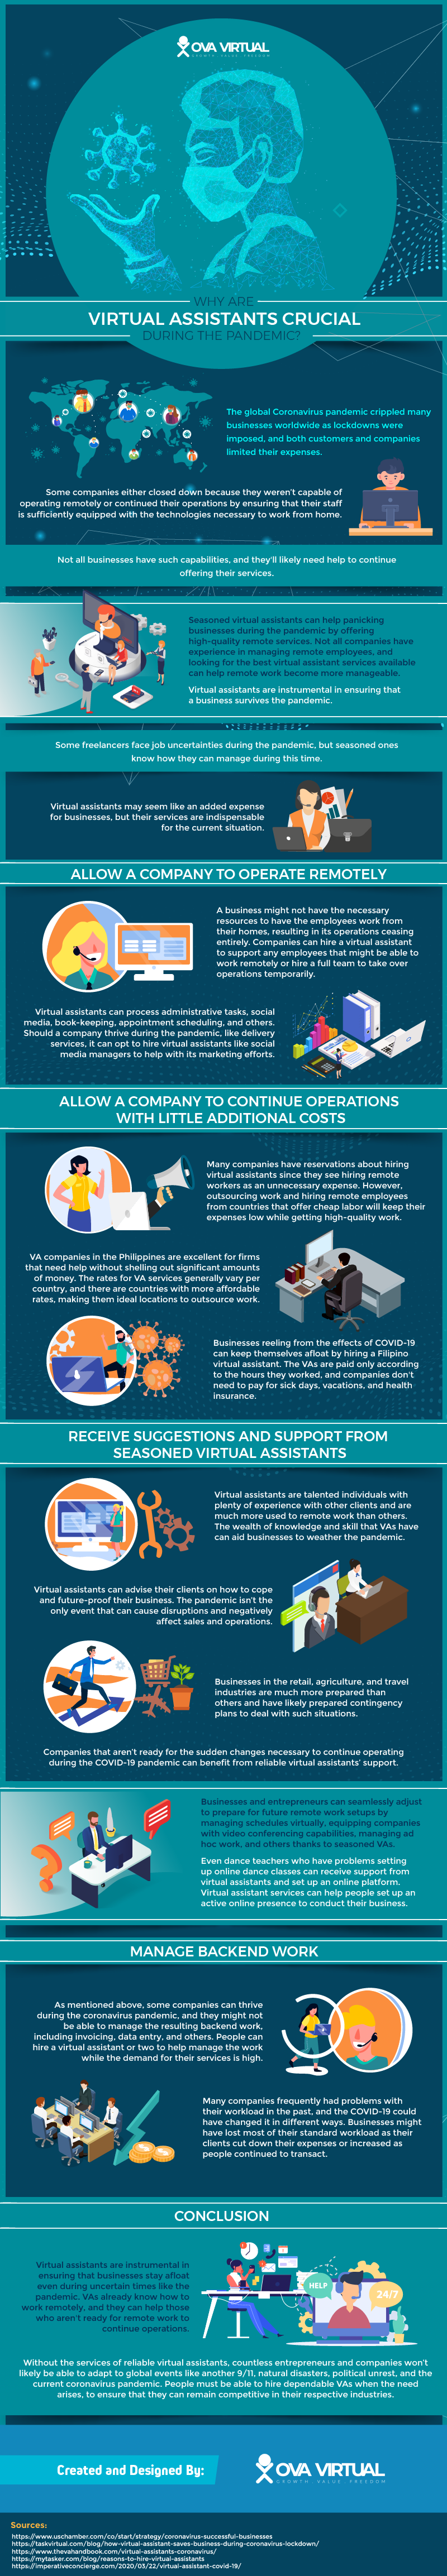 Why Are Virtual Assistants Crucial During the Pandemic? Infographic